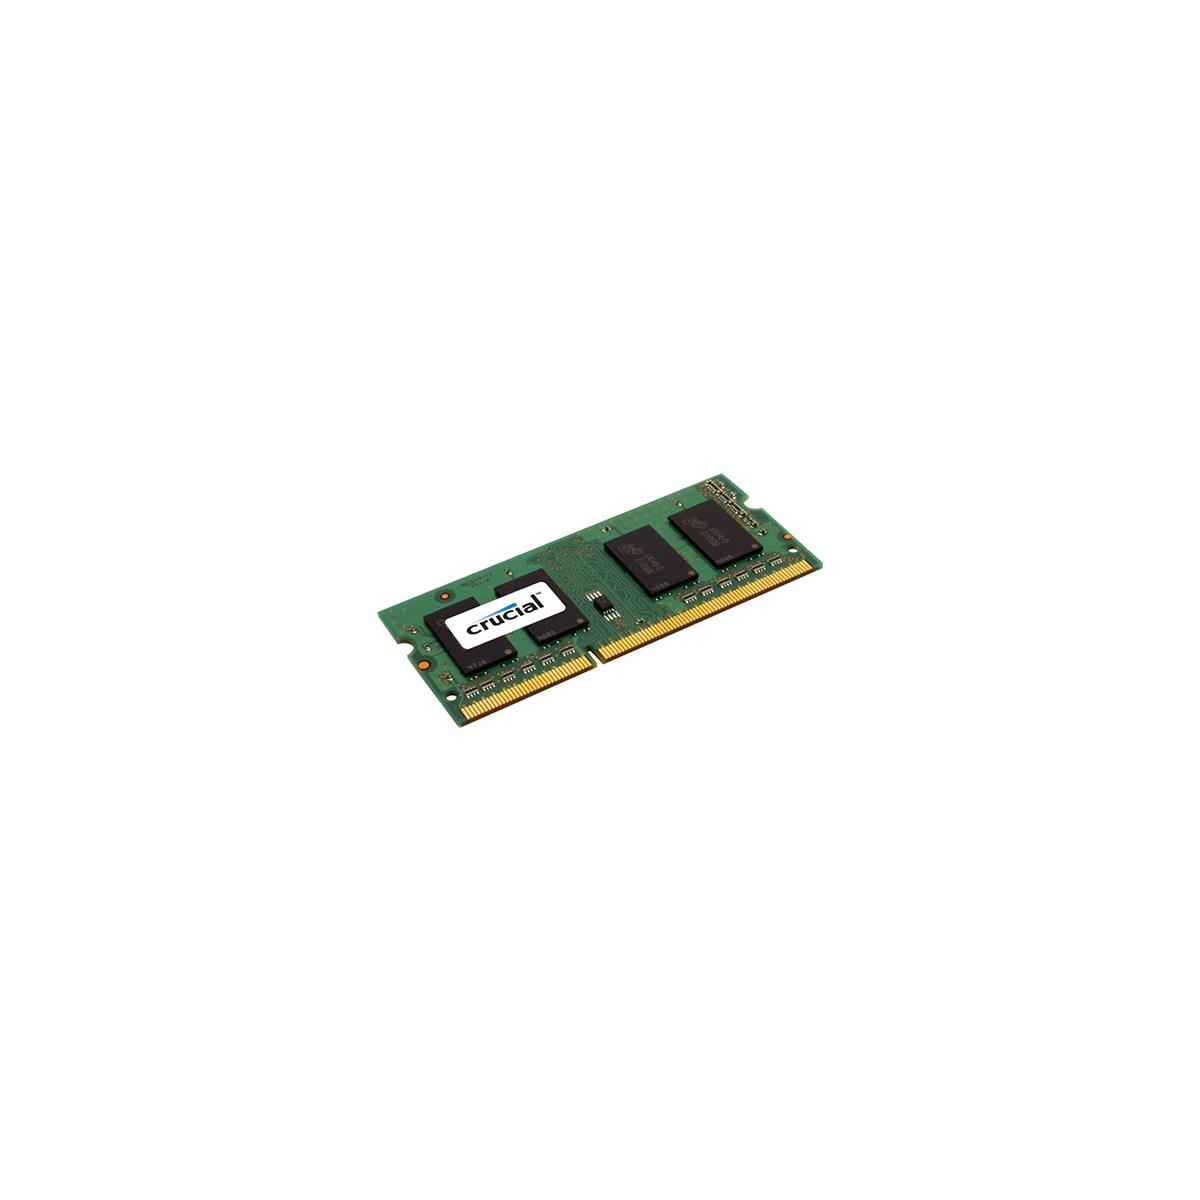 Image of Crucial 4GB 204-Pin SODIMM DDR3 1600 Mt/s (PC3-12800) Memory Module